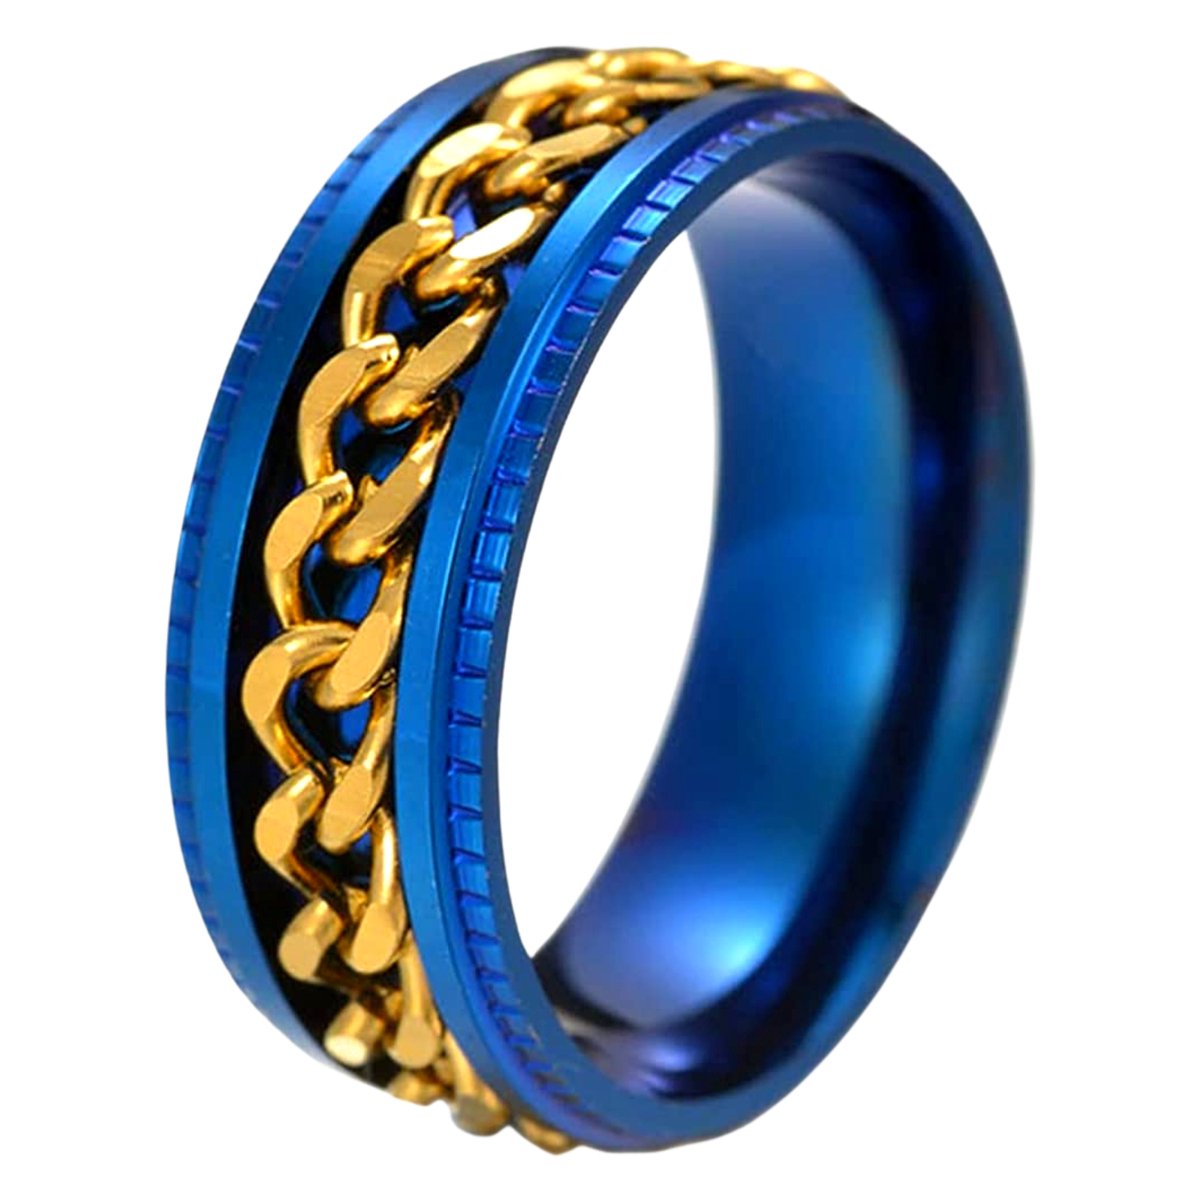 Anxiety Ring - (Ketting) - Stress Ring - Fidget Ring - Anxiety Ring For Finger - Draaibare Ring - Spinning Ring - Blauw-Goud - (17.50mm / maat 55)